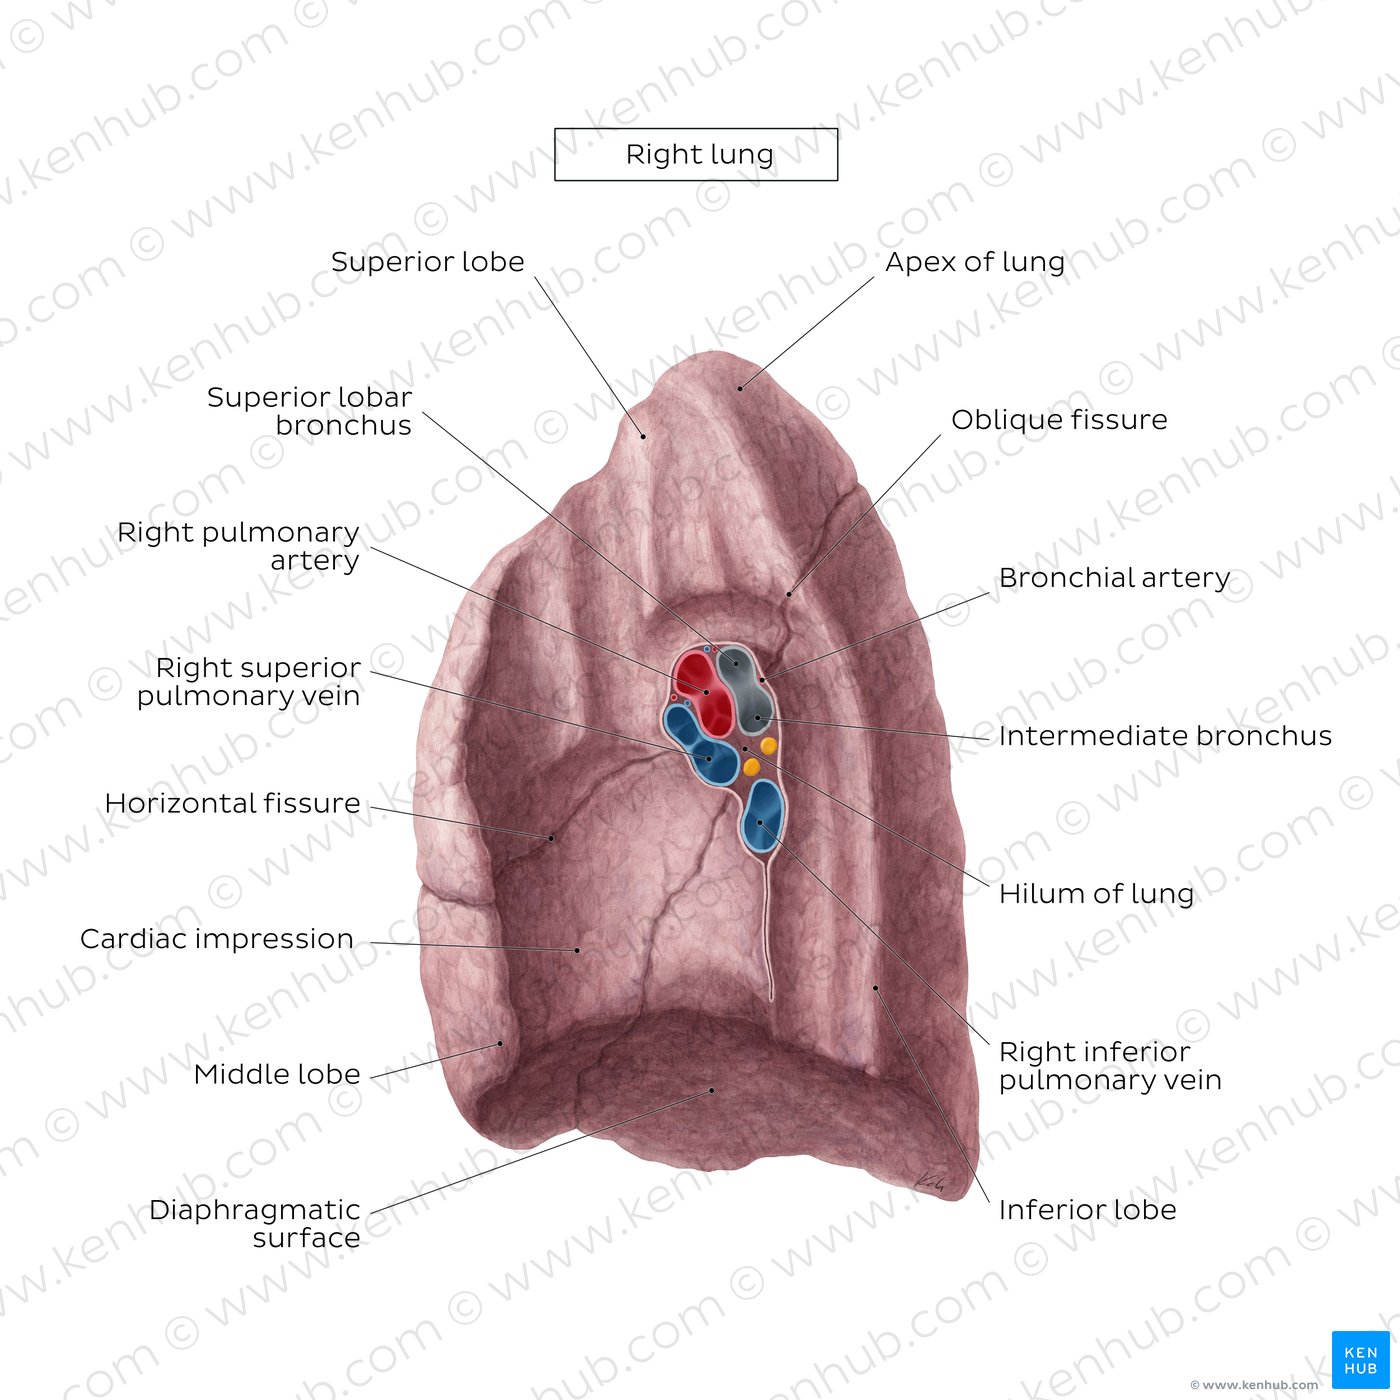 Overview of the medial surface of the right lung